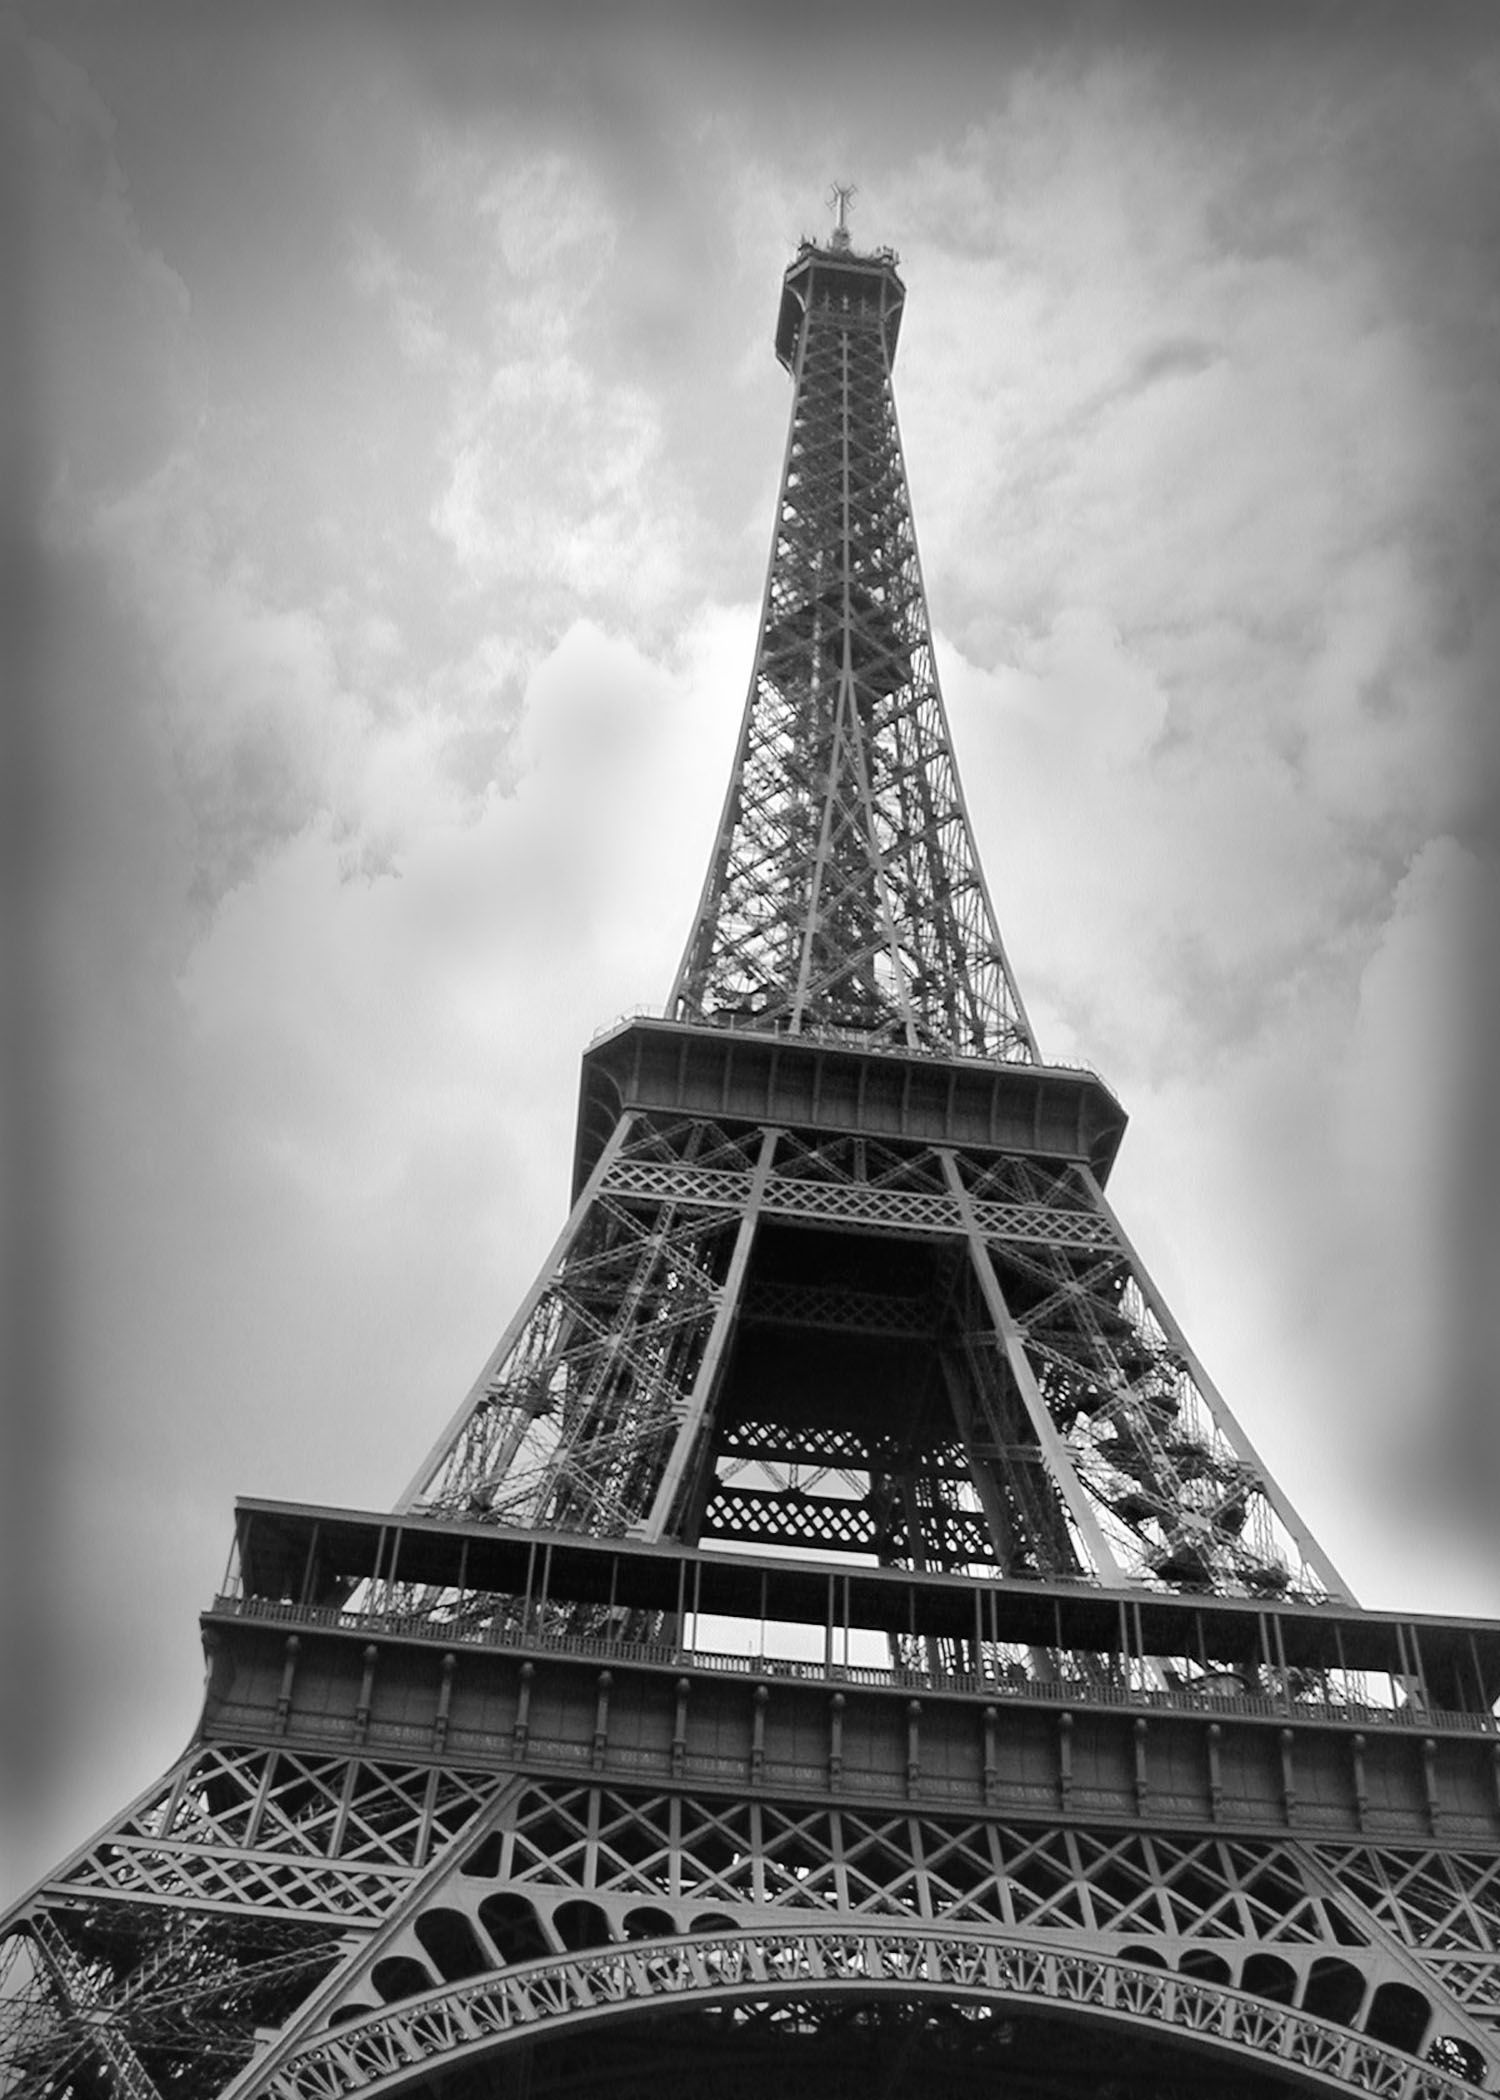 Architectural Photography – Think abstract | Tower, Paris france and ...